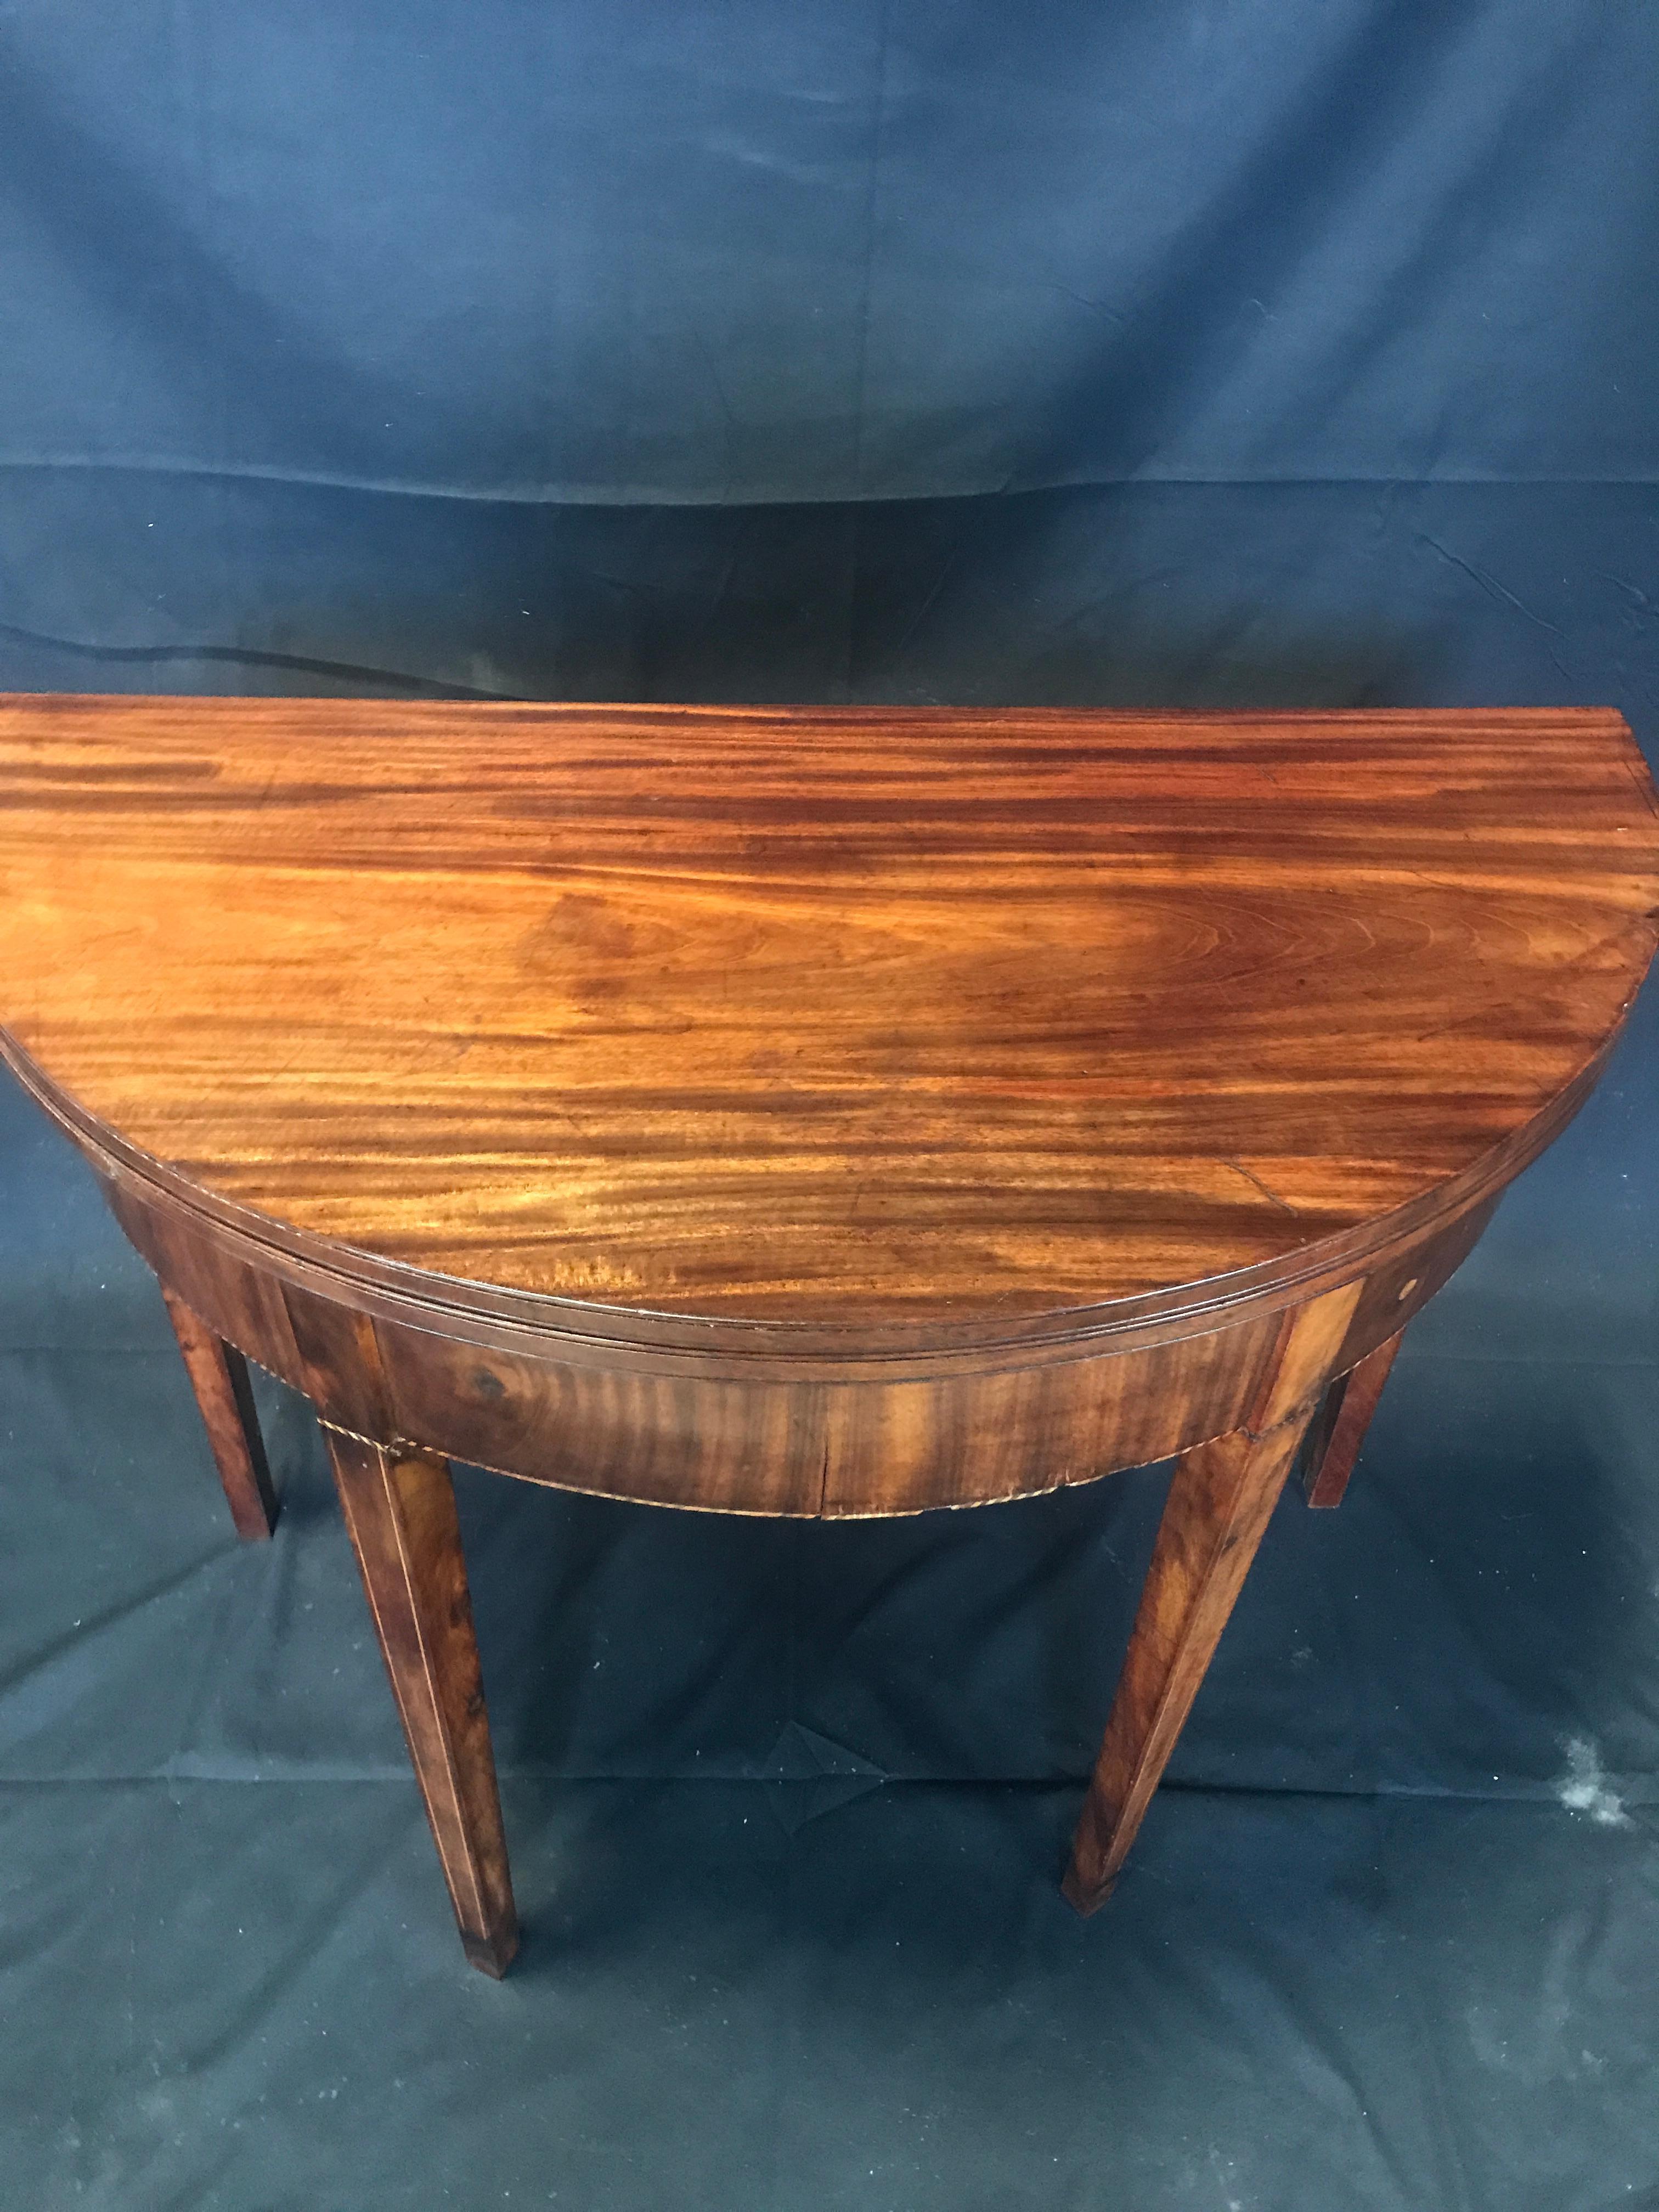 This super early American Hepplewhite inlaid mahogany card table in demilune shape is dated 1810-1815. Back leg swings out in typical game table function to support top when open.
#2385

Measures: H skirt 22.5” H open 27.5” W 35.5” D closed